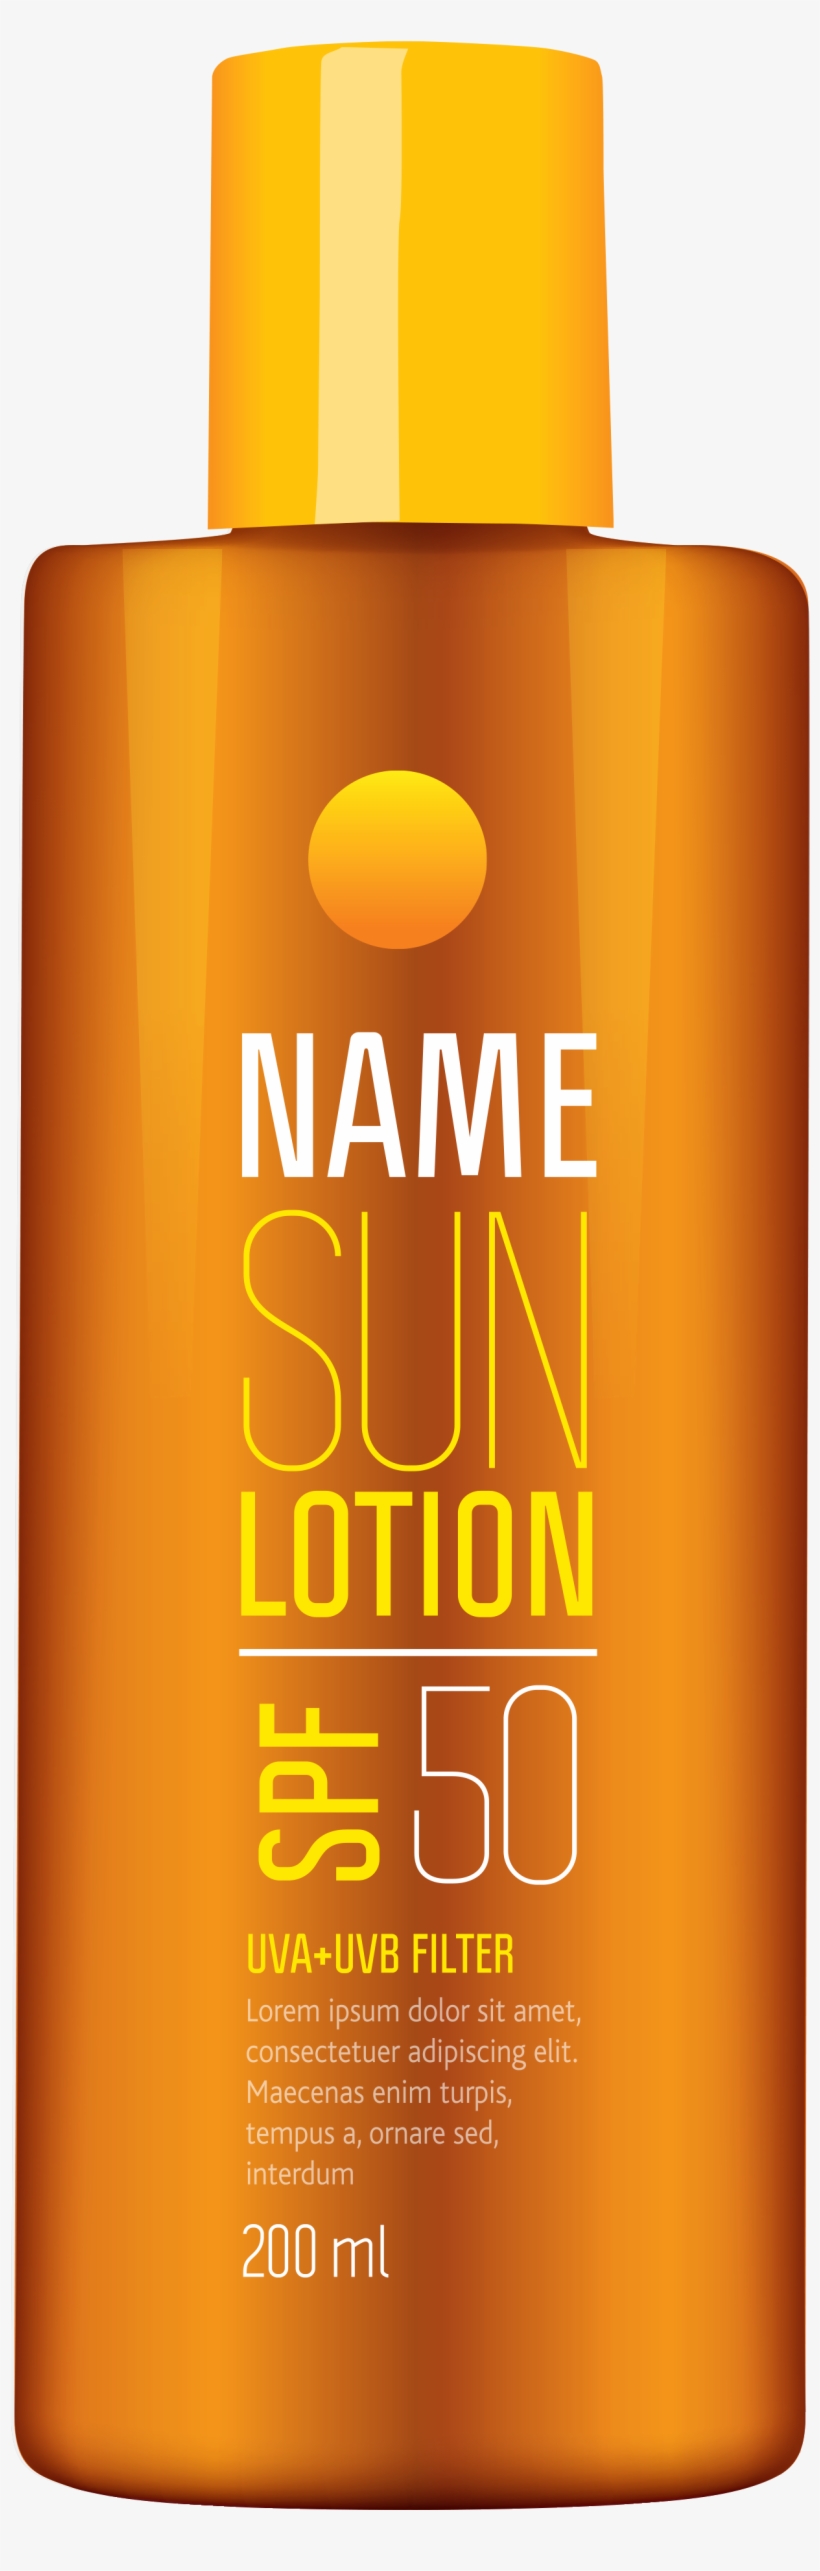 Sun Lotion Tube Png Clipart Picture - Sun Lotion Png, transparent png #2351915